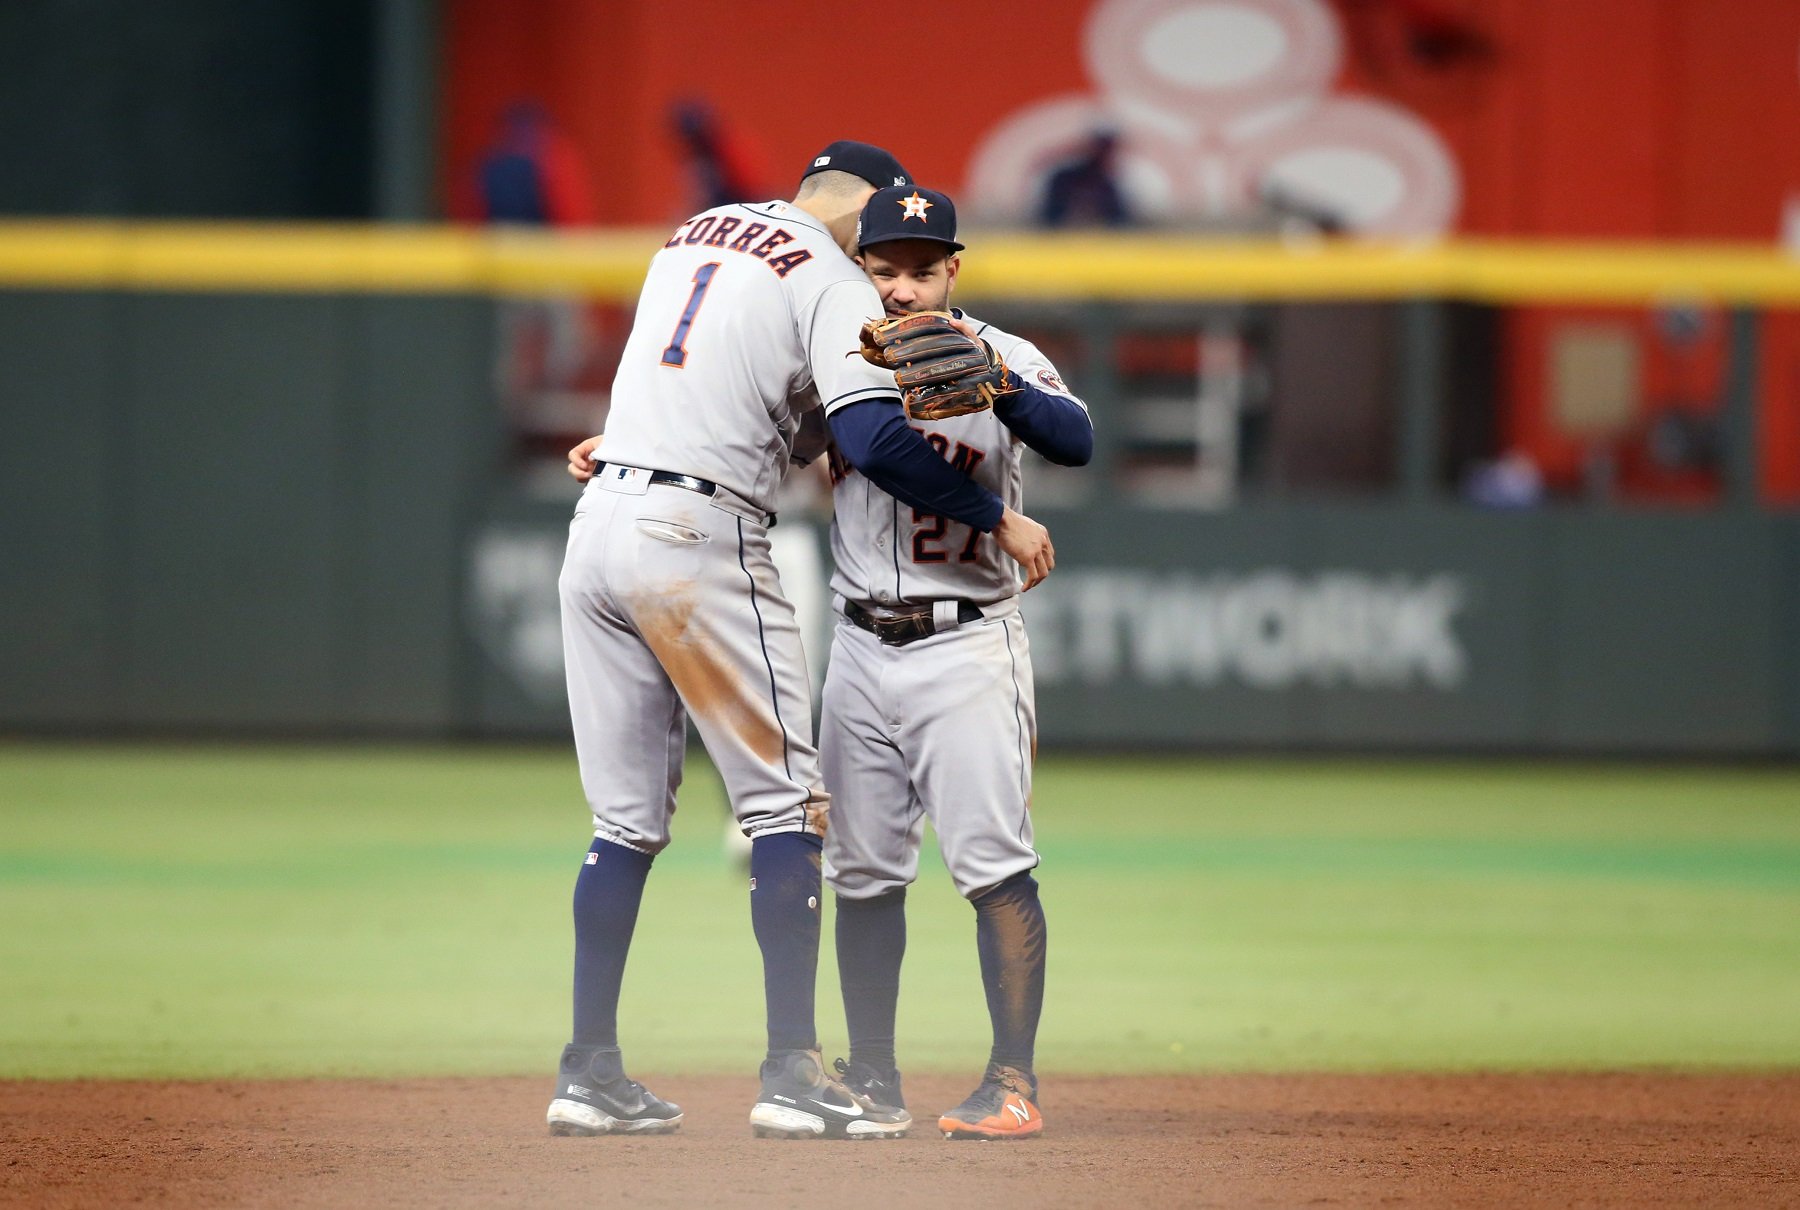 Correa to Face Adjustment with Polanco - Twins - Twins Daily